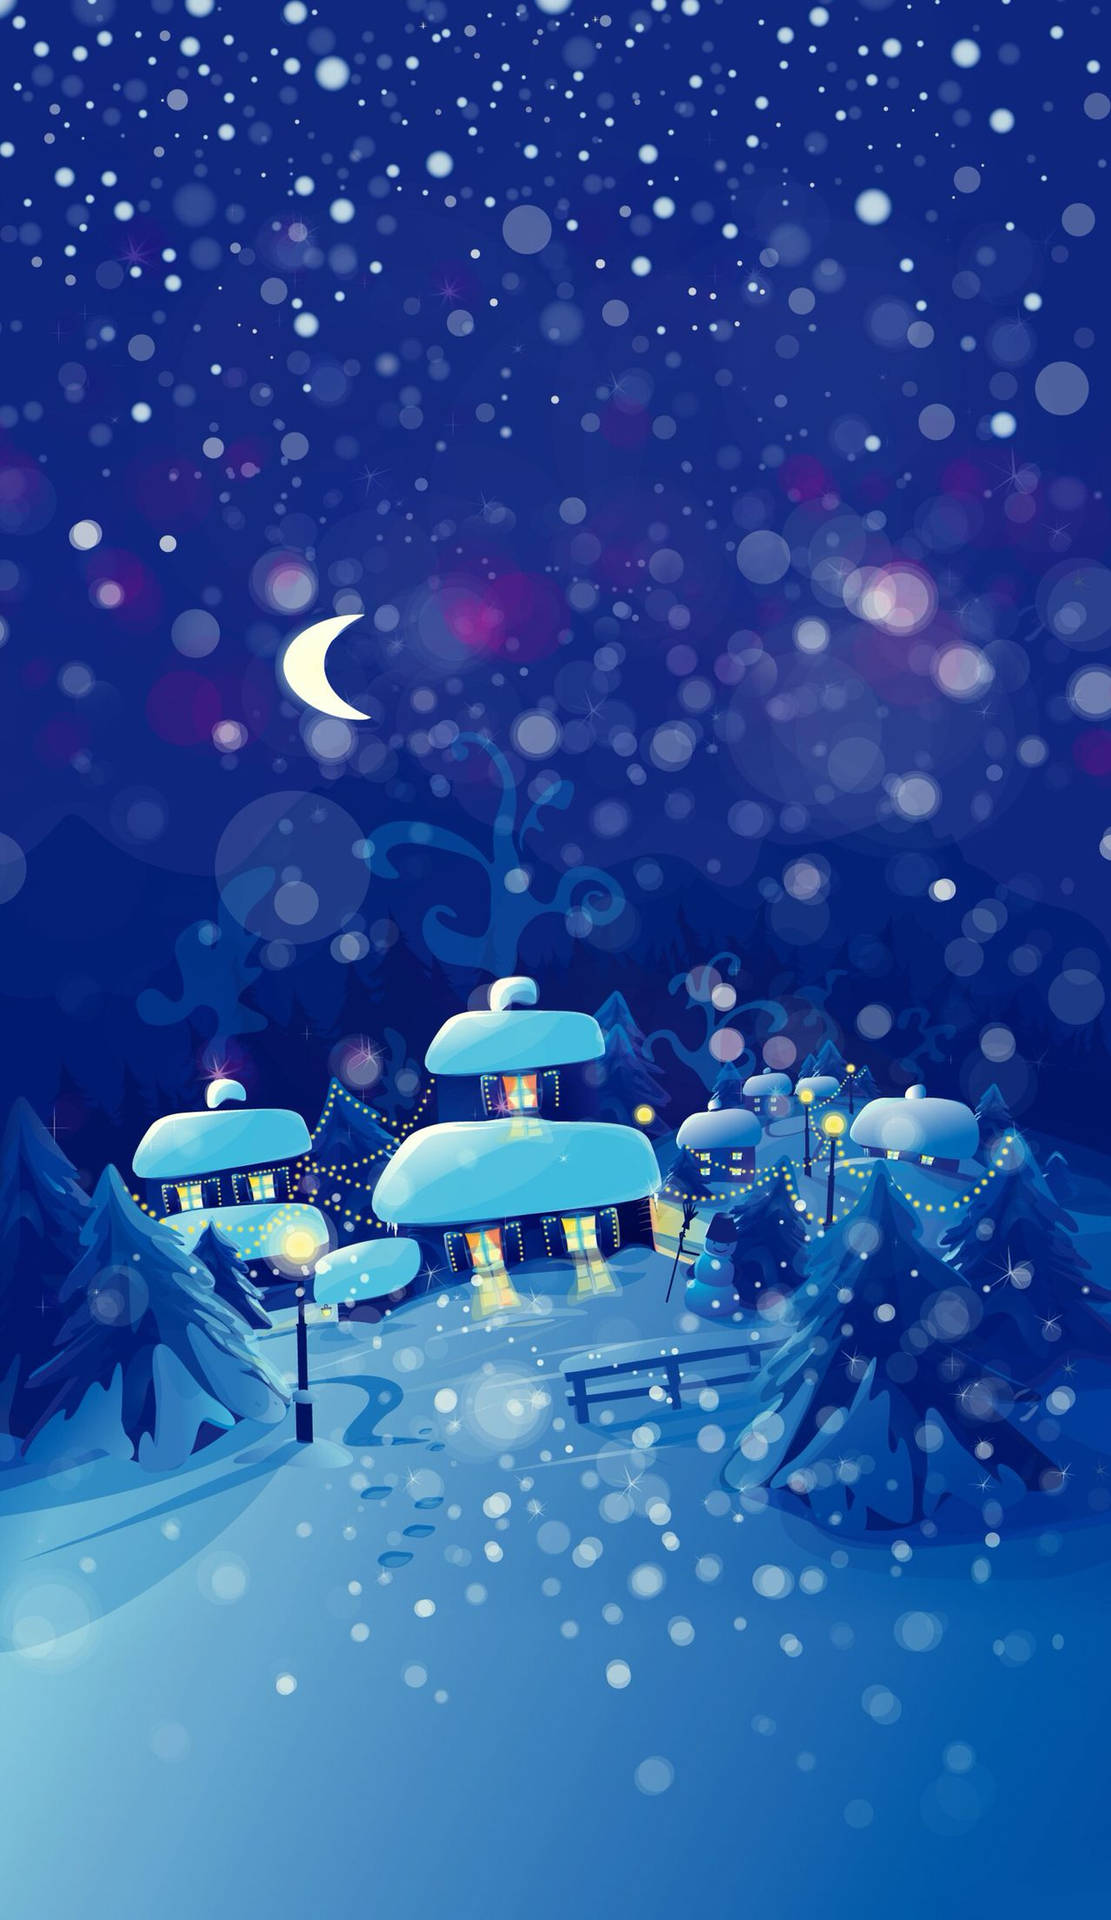 A Winter Scene With Snow Falling On The Ground Wallpaper